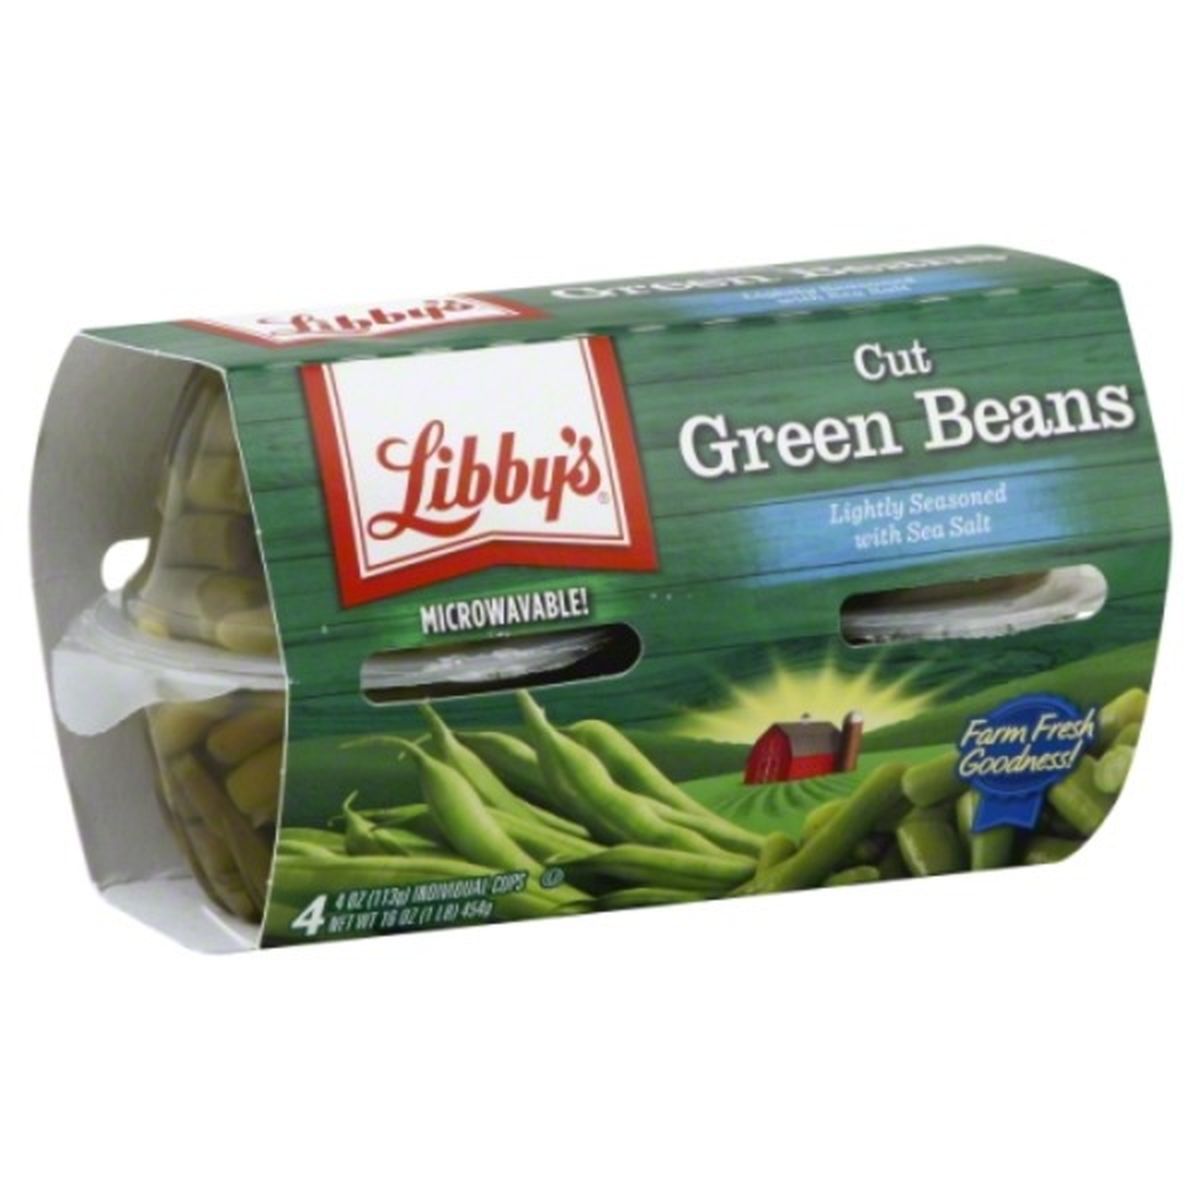 Calories in Libby's Green Beans, Cut